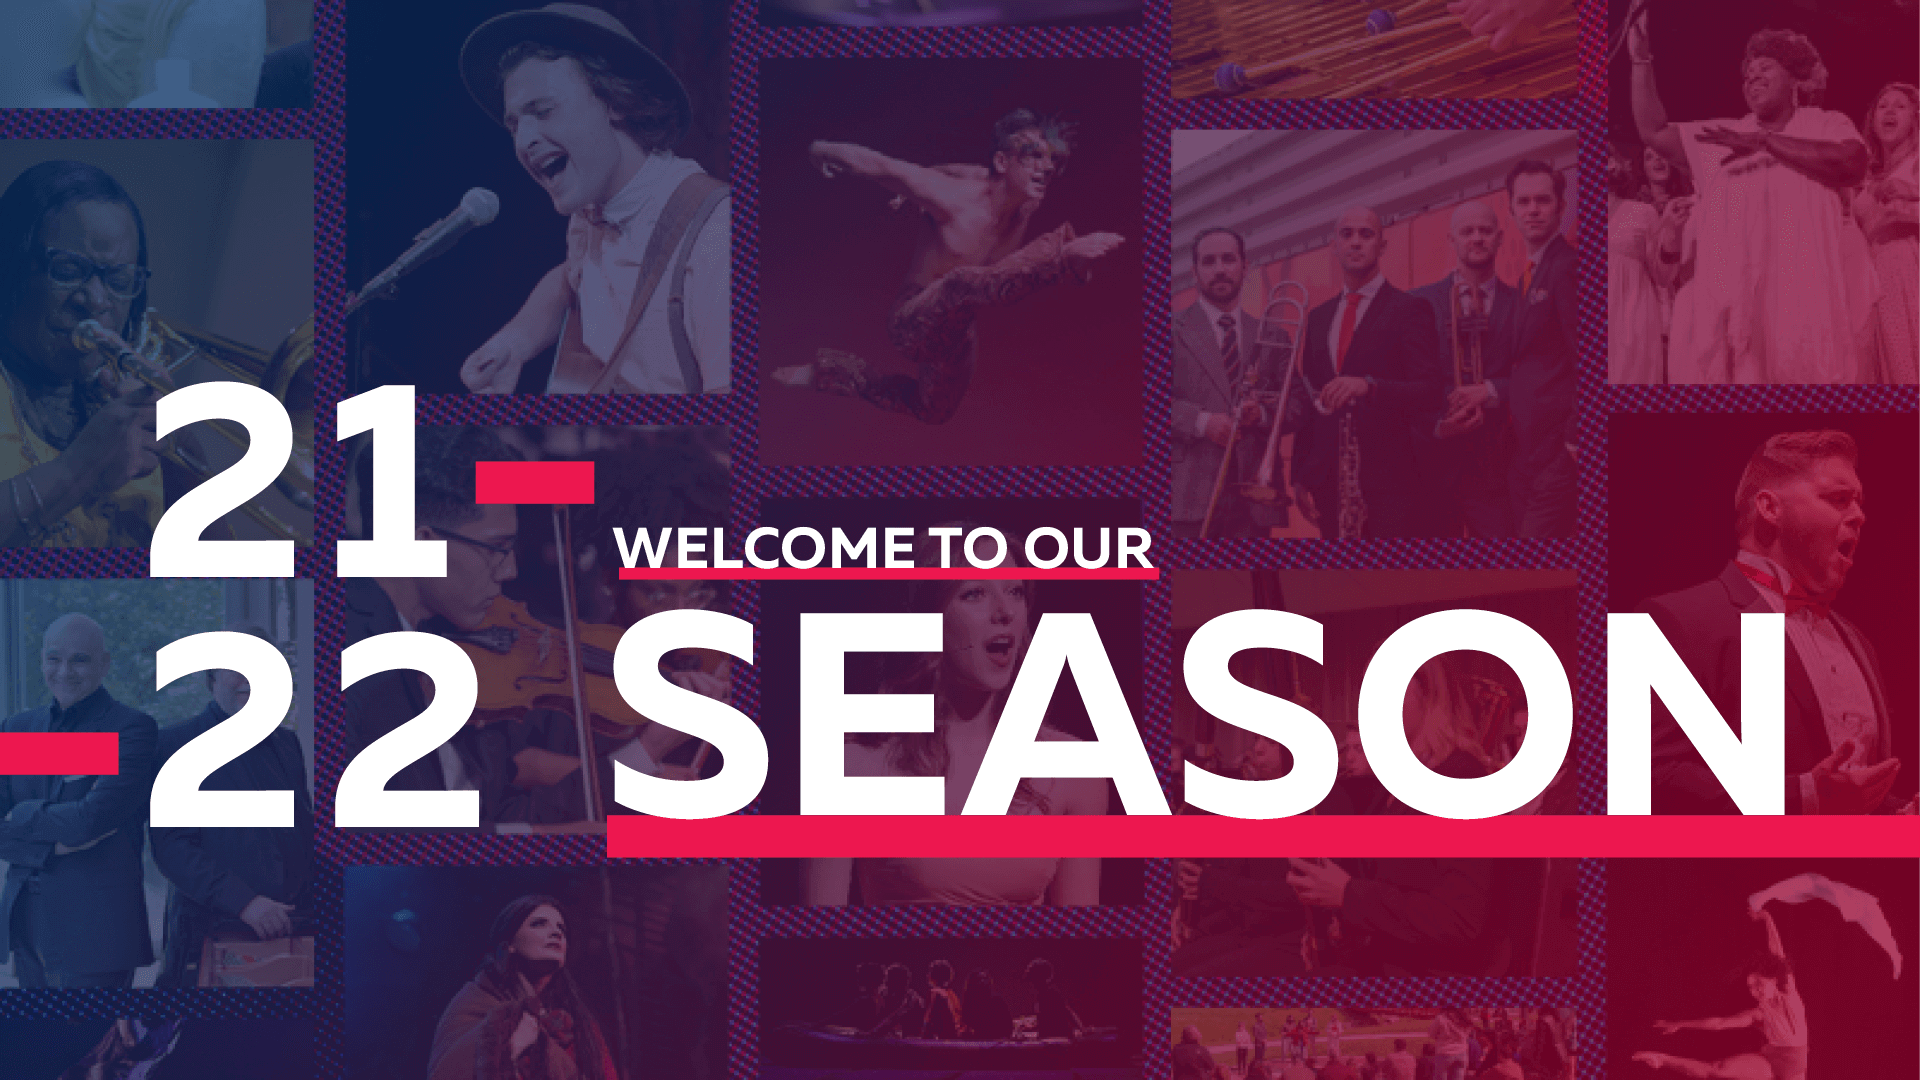 Live Music, Theatre and Dance Returns! Conservatory Performs 2021/22 Season Announcement